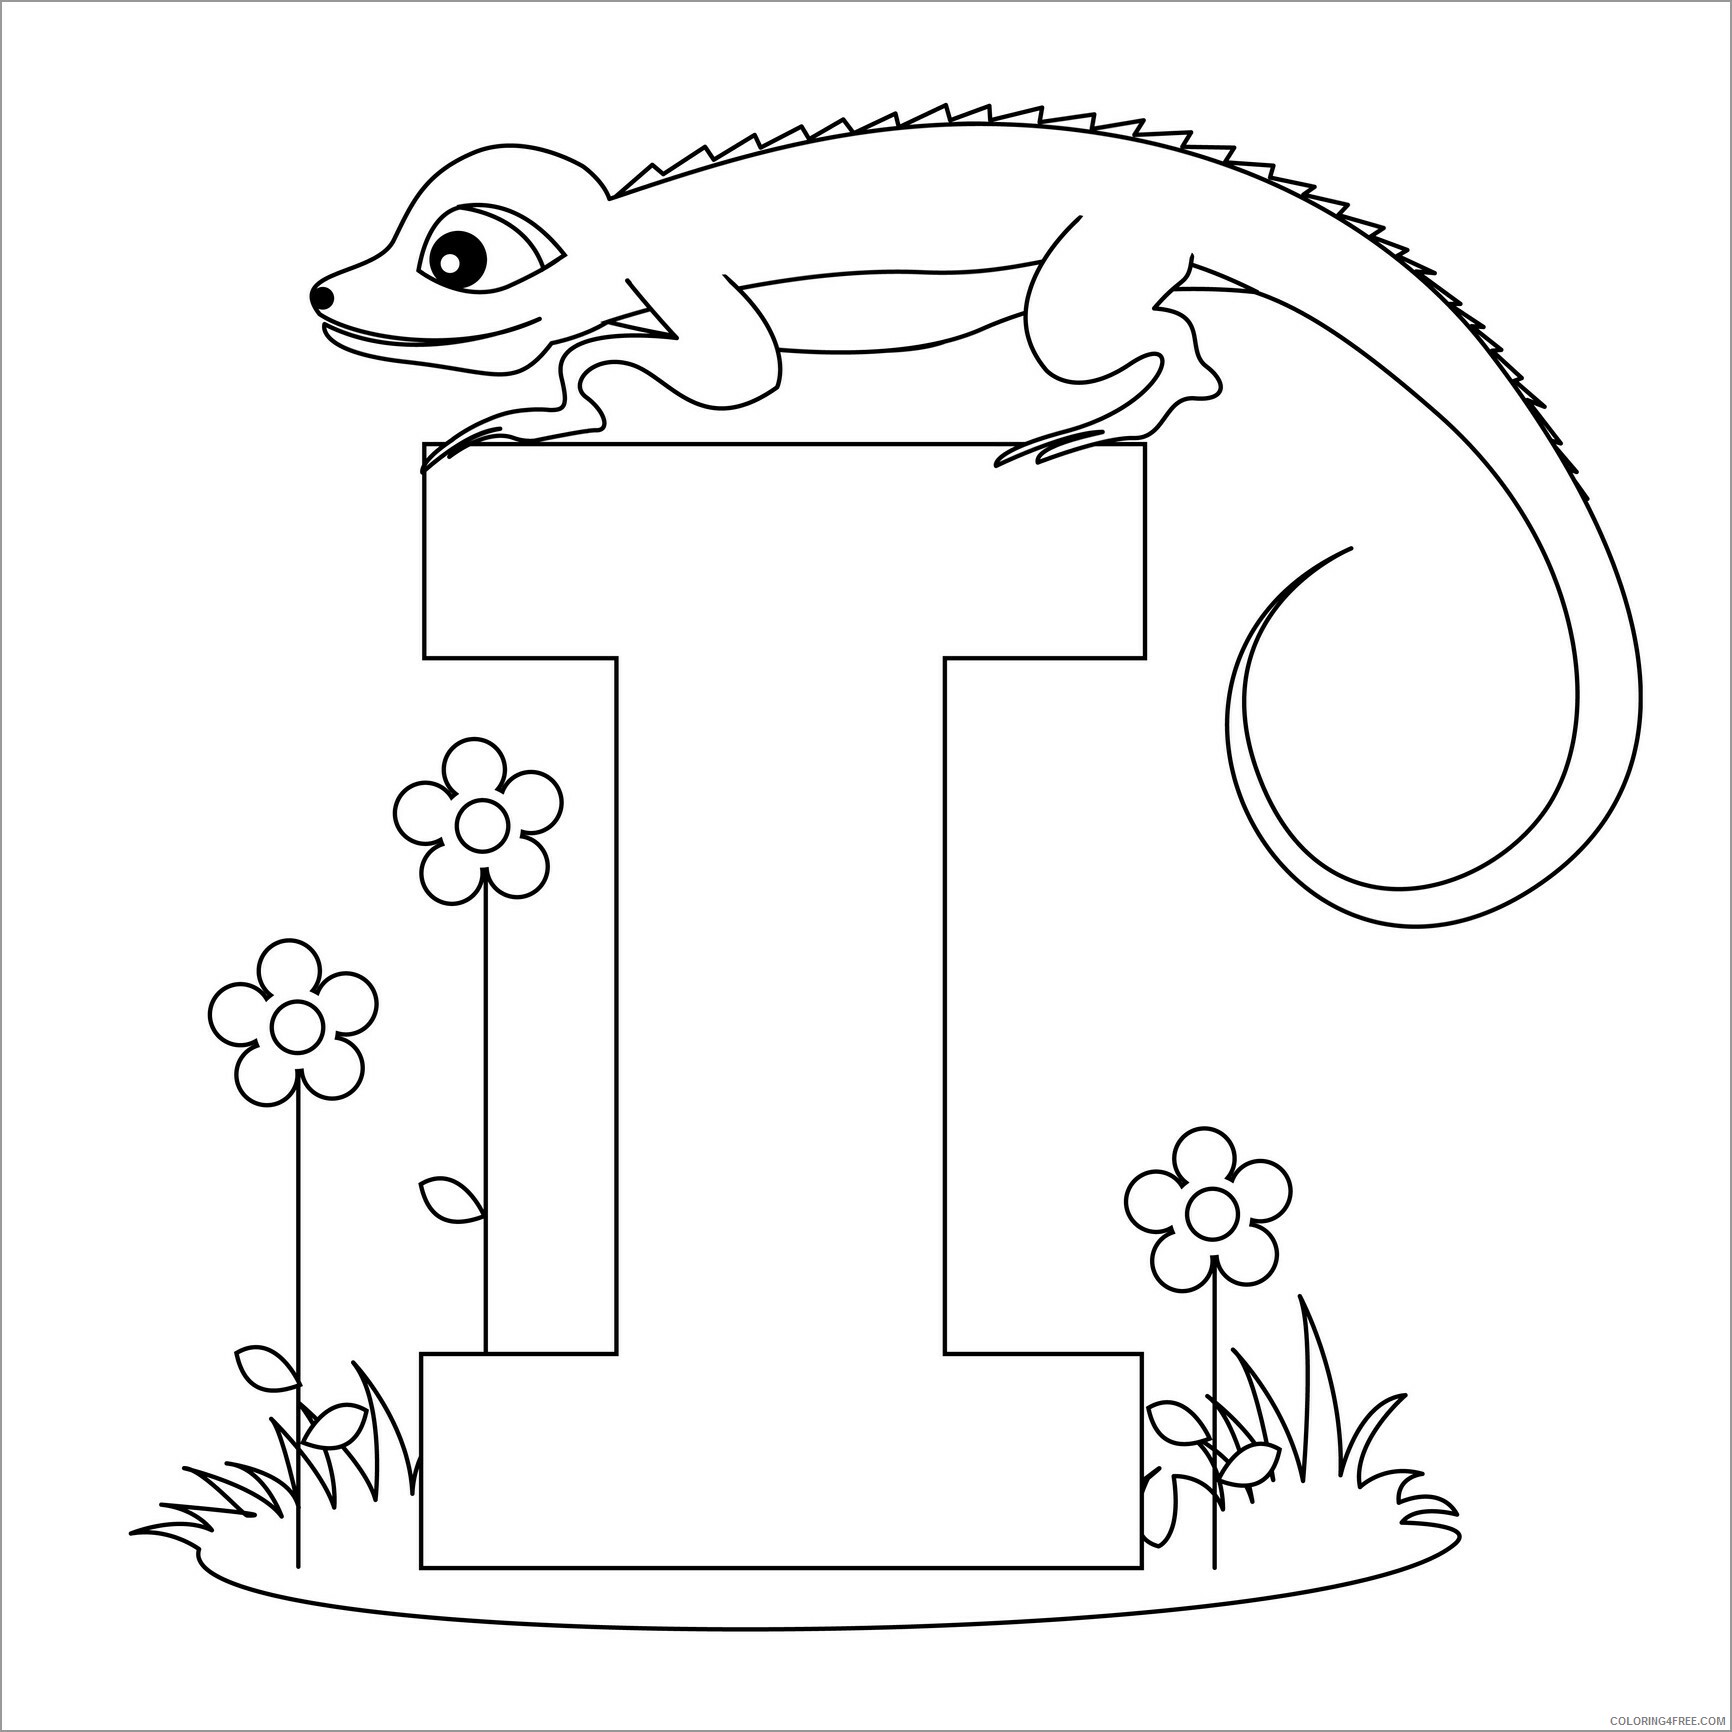 Iguana Coloring Pages Animal Printable Sheets printable letter i for iguana 2021 2859 Coloring4free